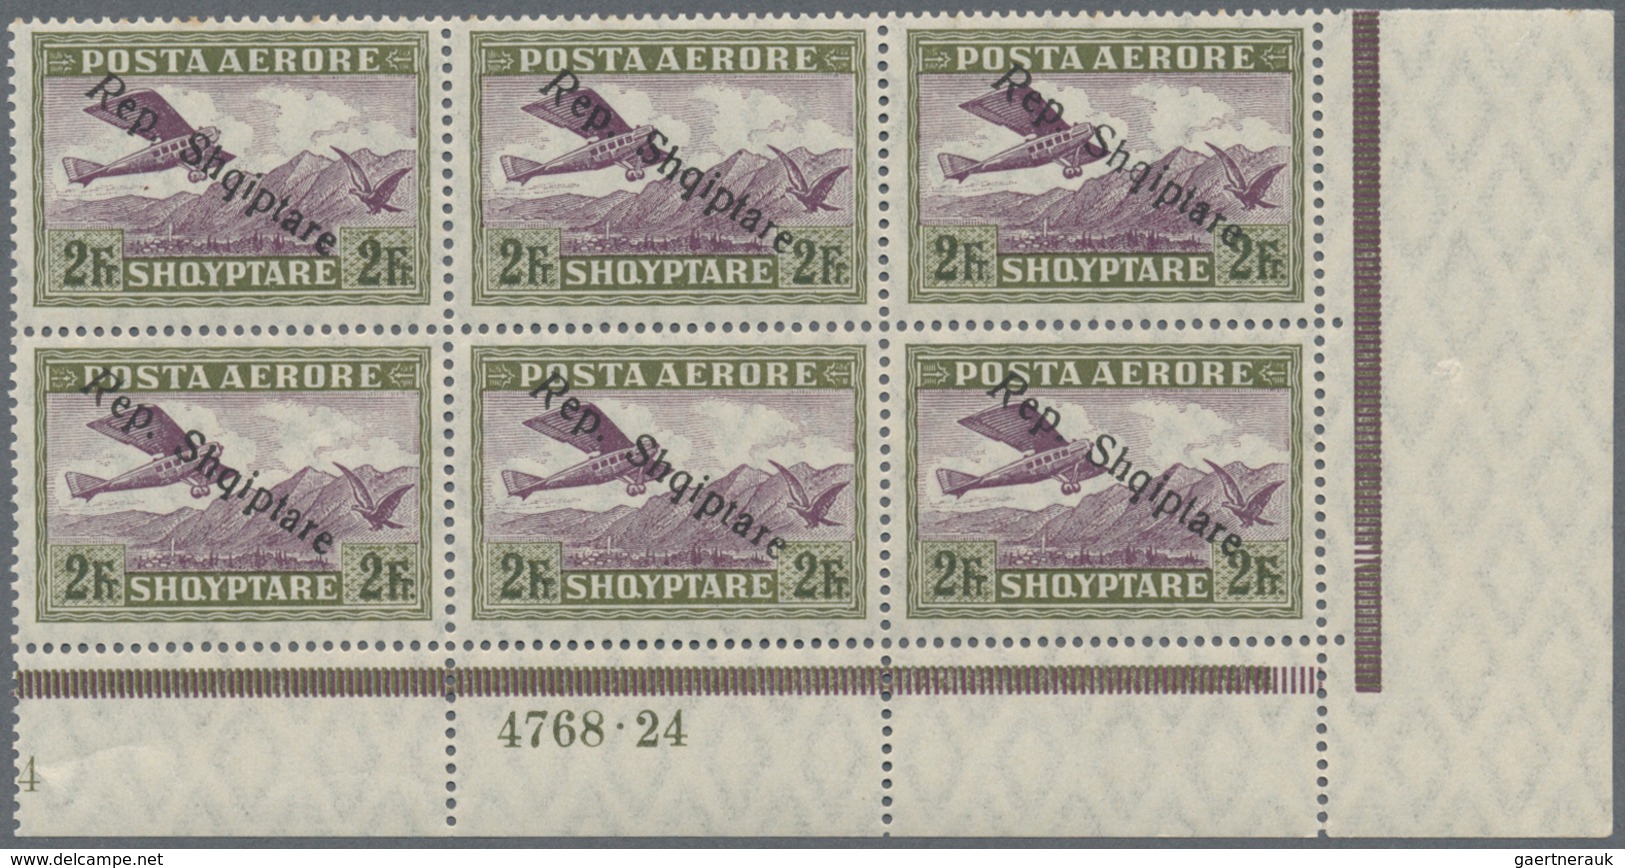 Albanien: 1927, 50 Q, 1 F And 2 F Airmail Stamps With Ovp "Rep.Shqiptare", Three Lower Right Corner - Albania